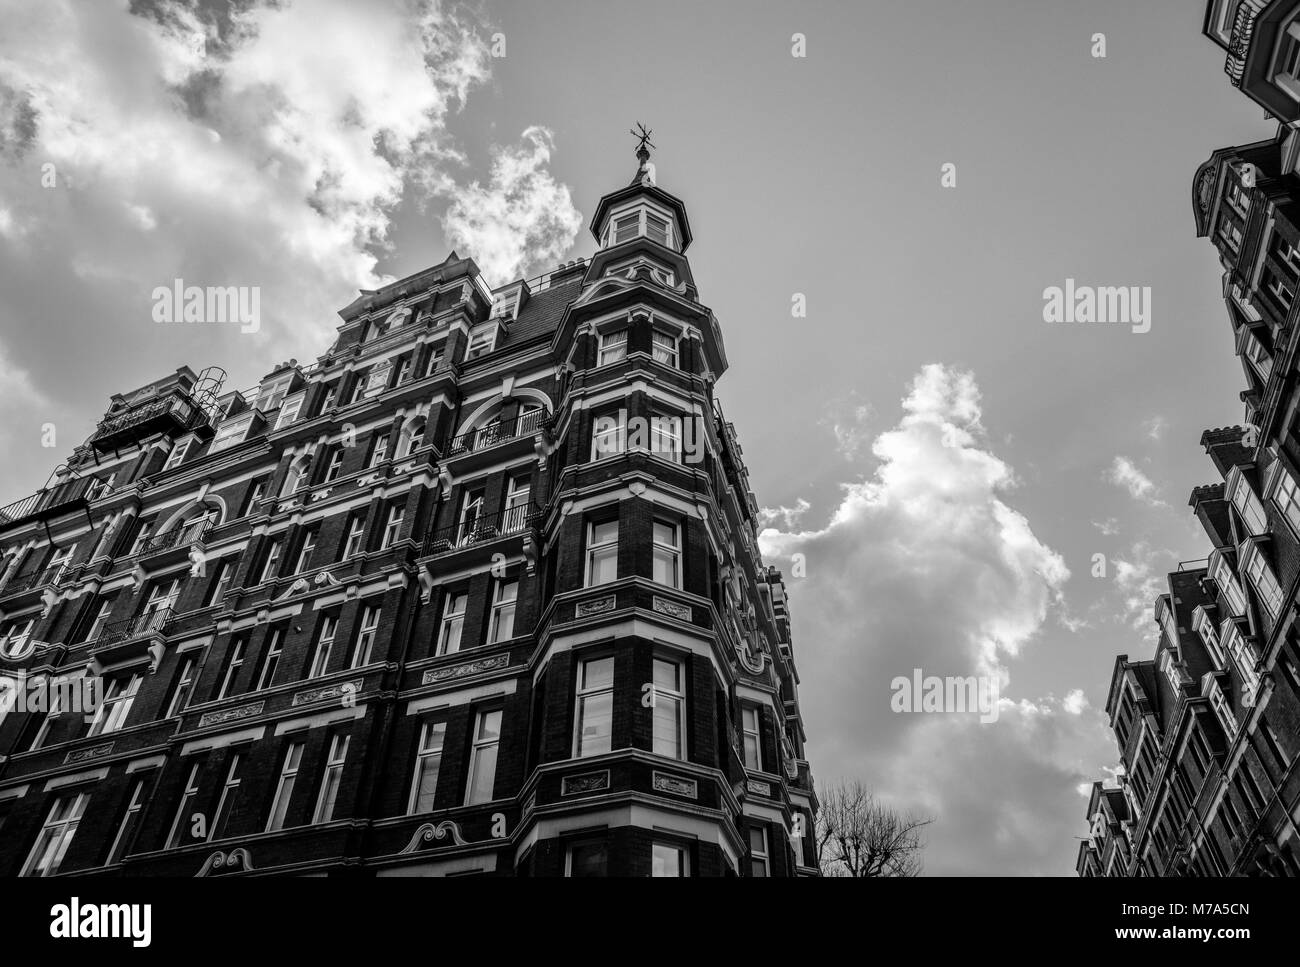 High angle monochrome view looking up at an expensive Edwardian block of period apartments typically found in Kensington, West London, UK Stock Photo